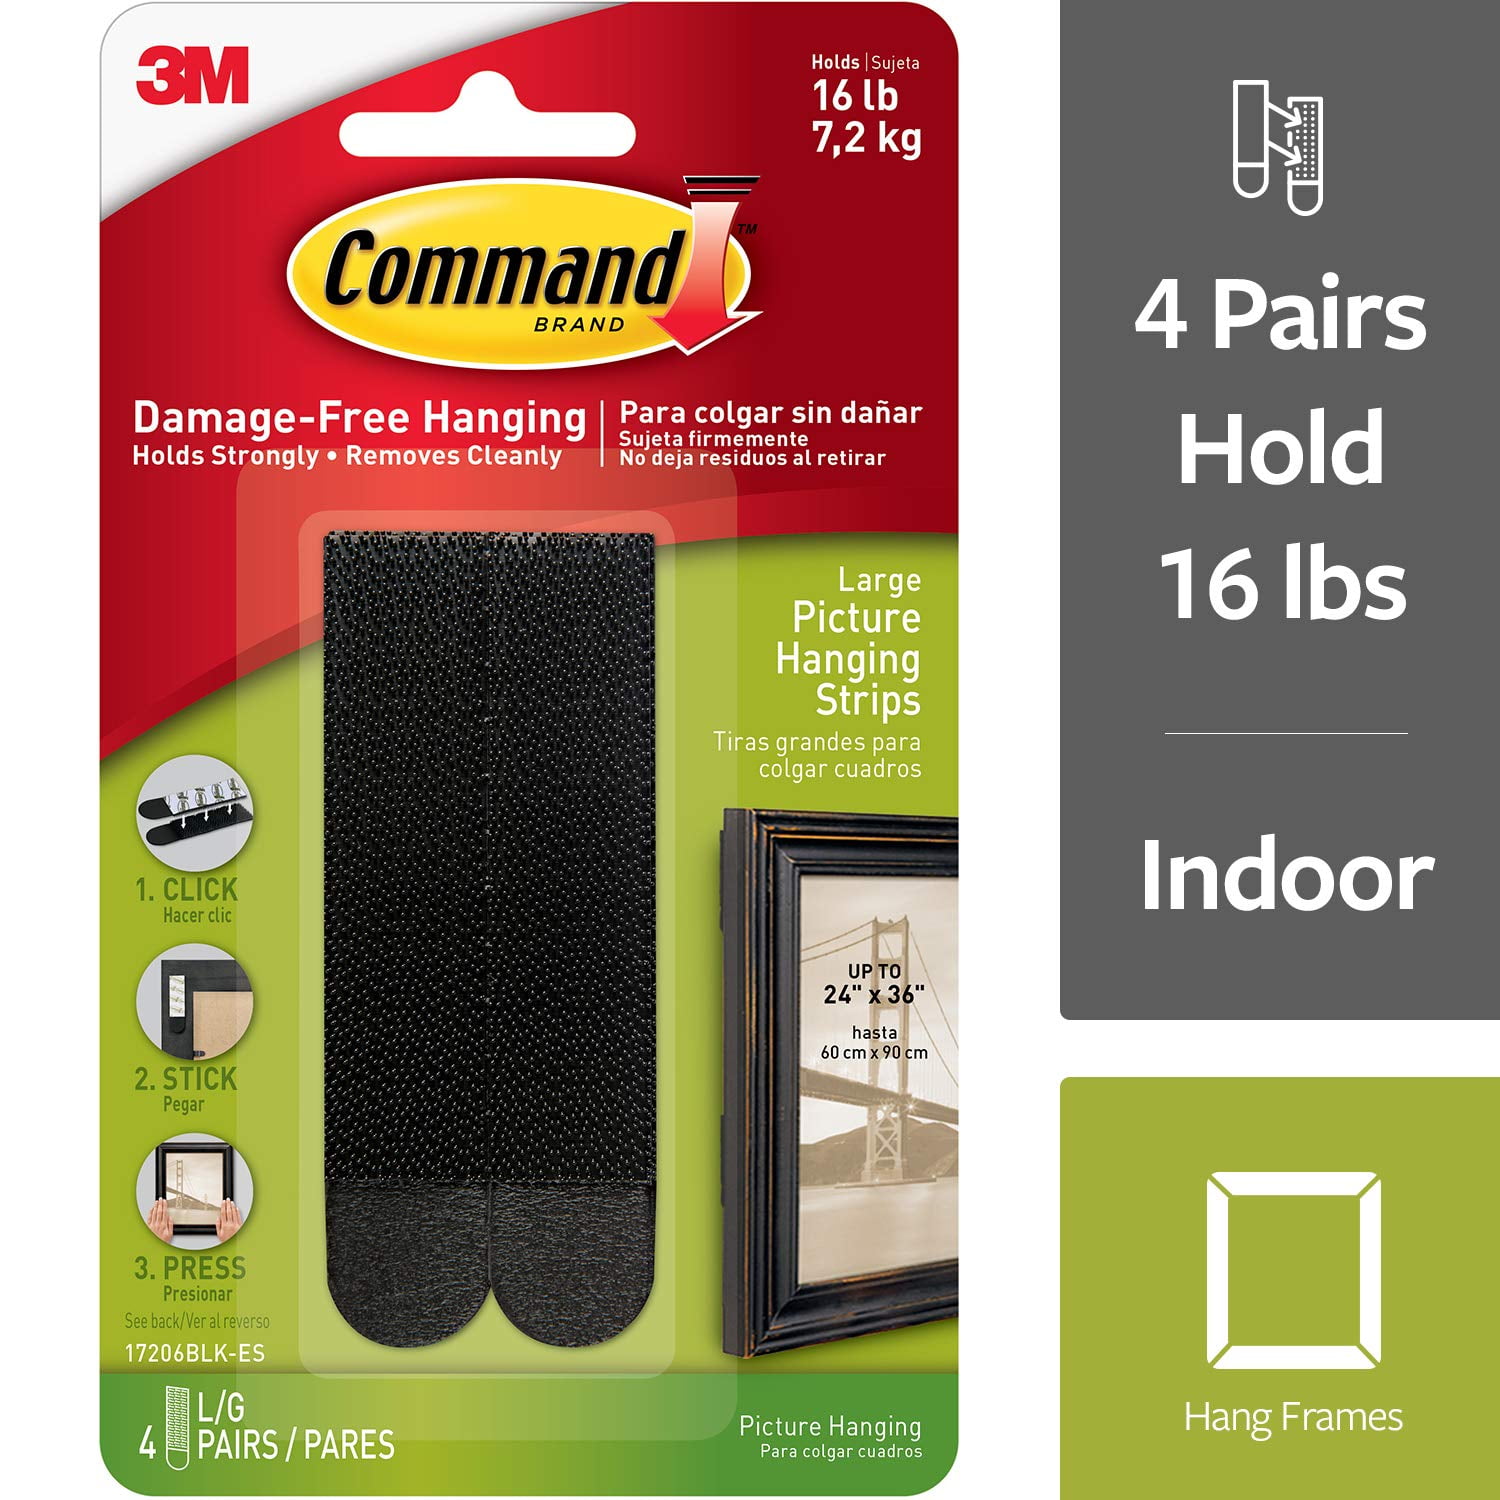 20 PAIRS COMMAND 3M DAMAGE FREE HANGING LARGE PICTURE STRIPS 16 lb NT 7465 